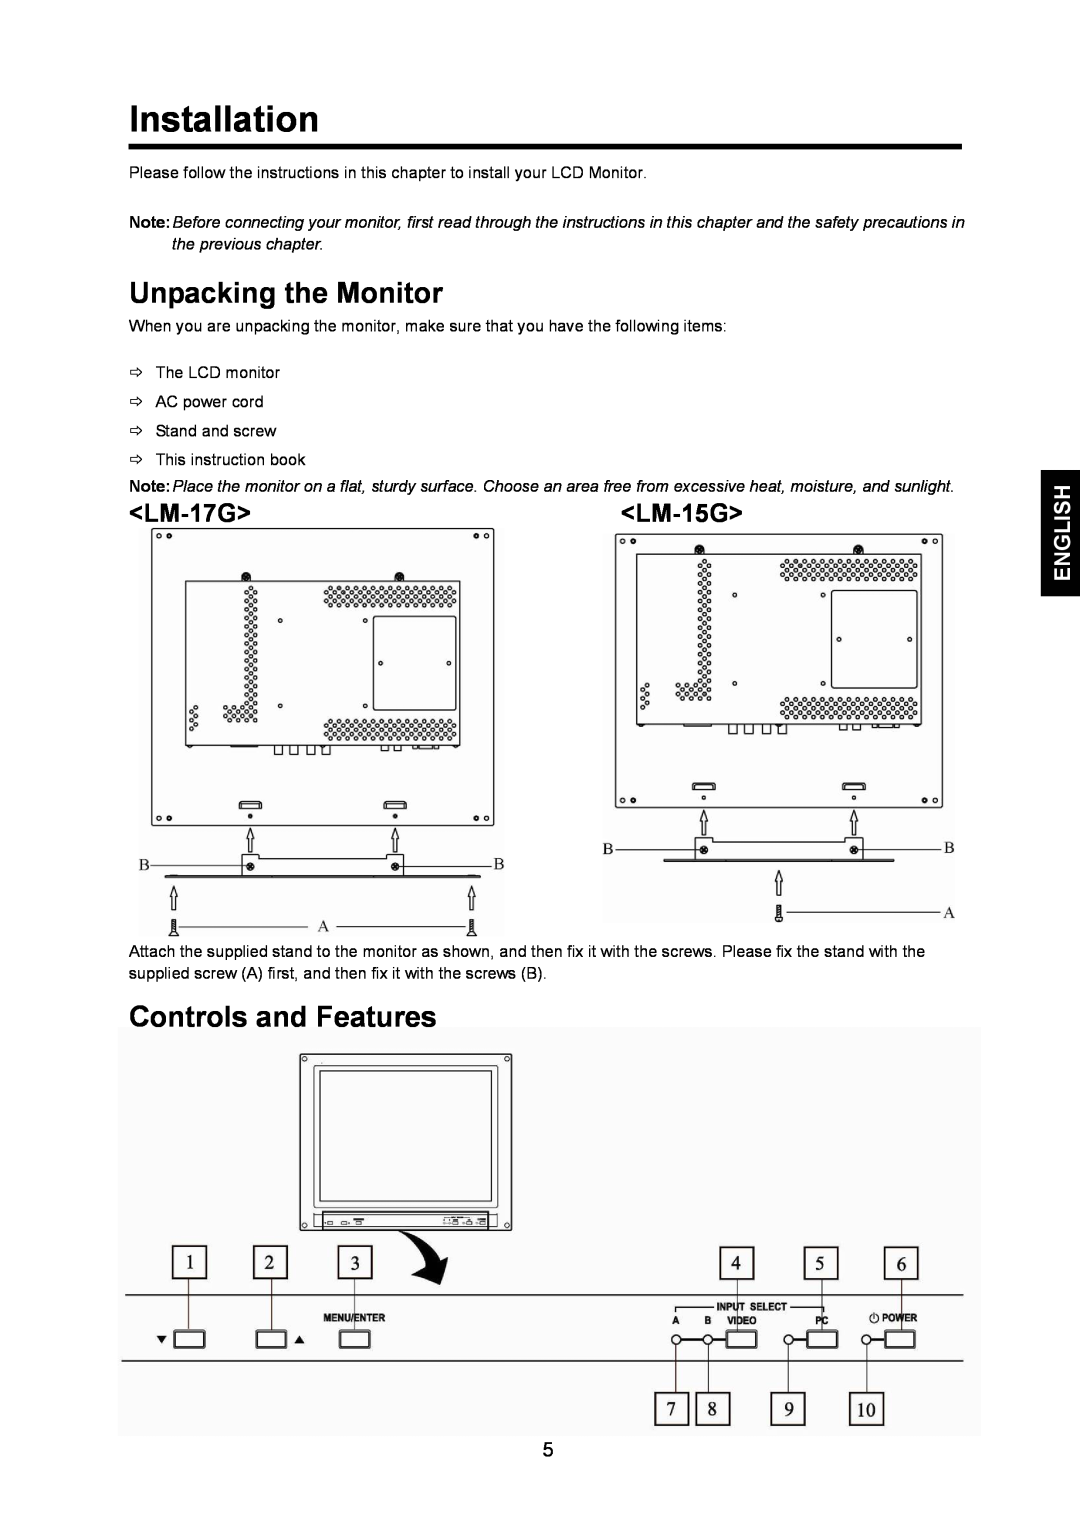 JVC manual Installation, Unpacking the Monitor, Controls and Features, LM-17GLM-15G, English 